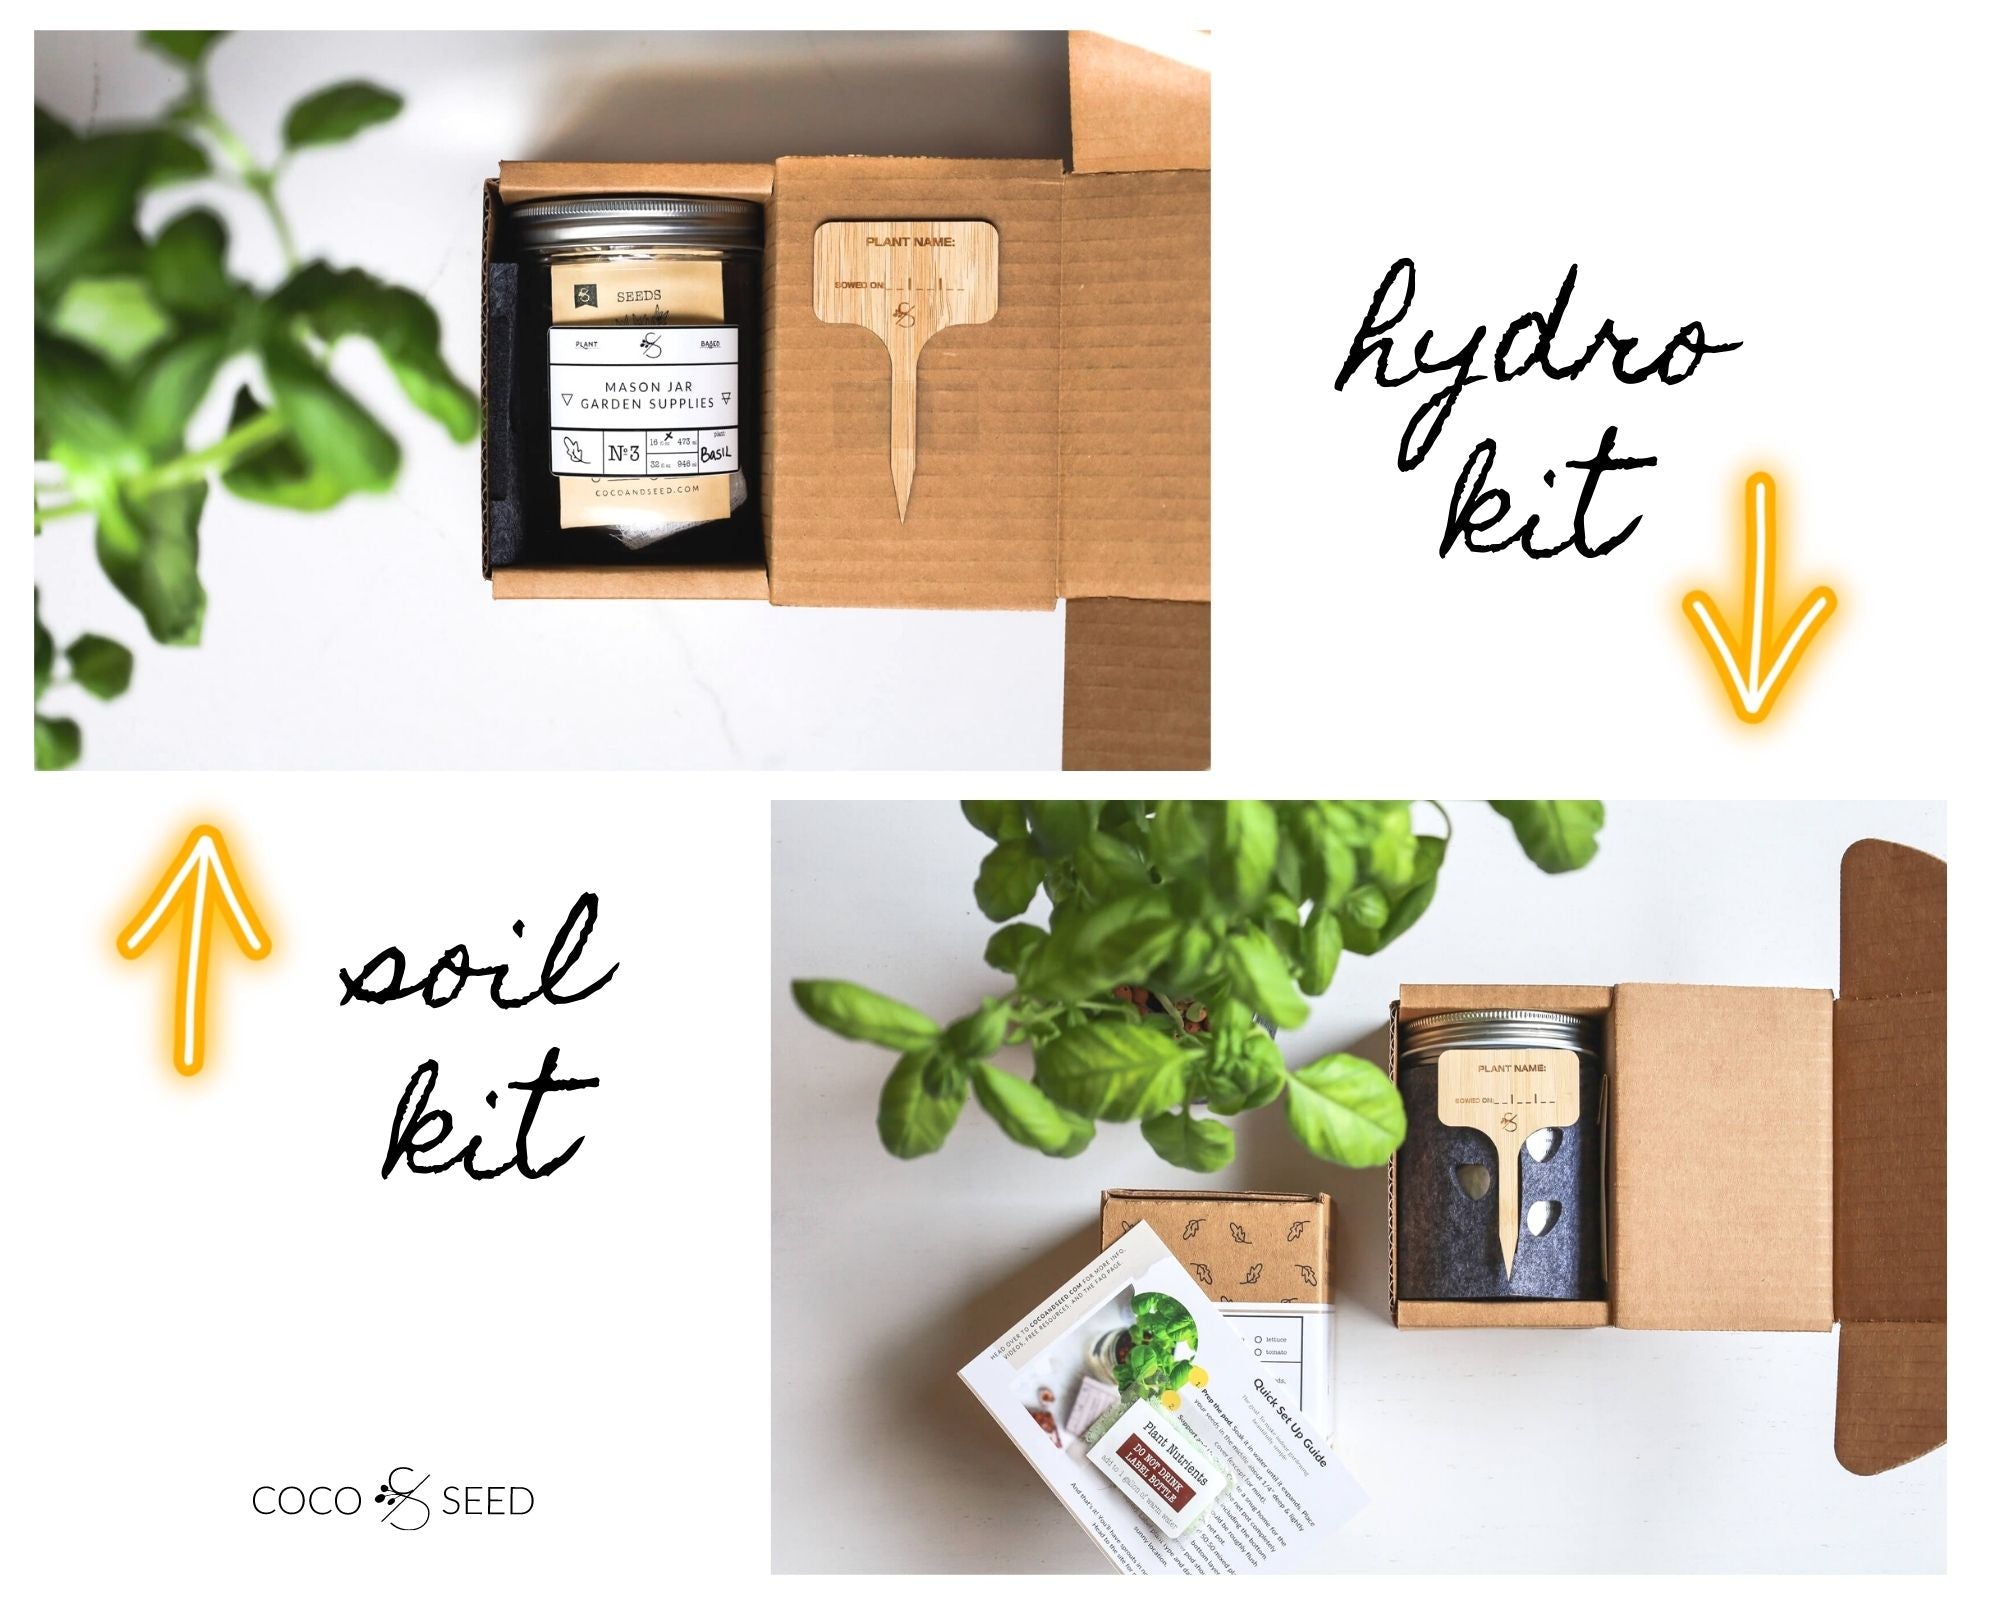 coco and seed hydroponic kit and soil herb plant kit collage